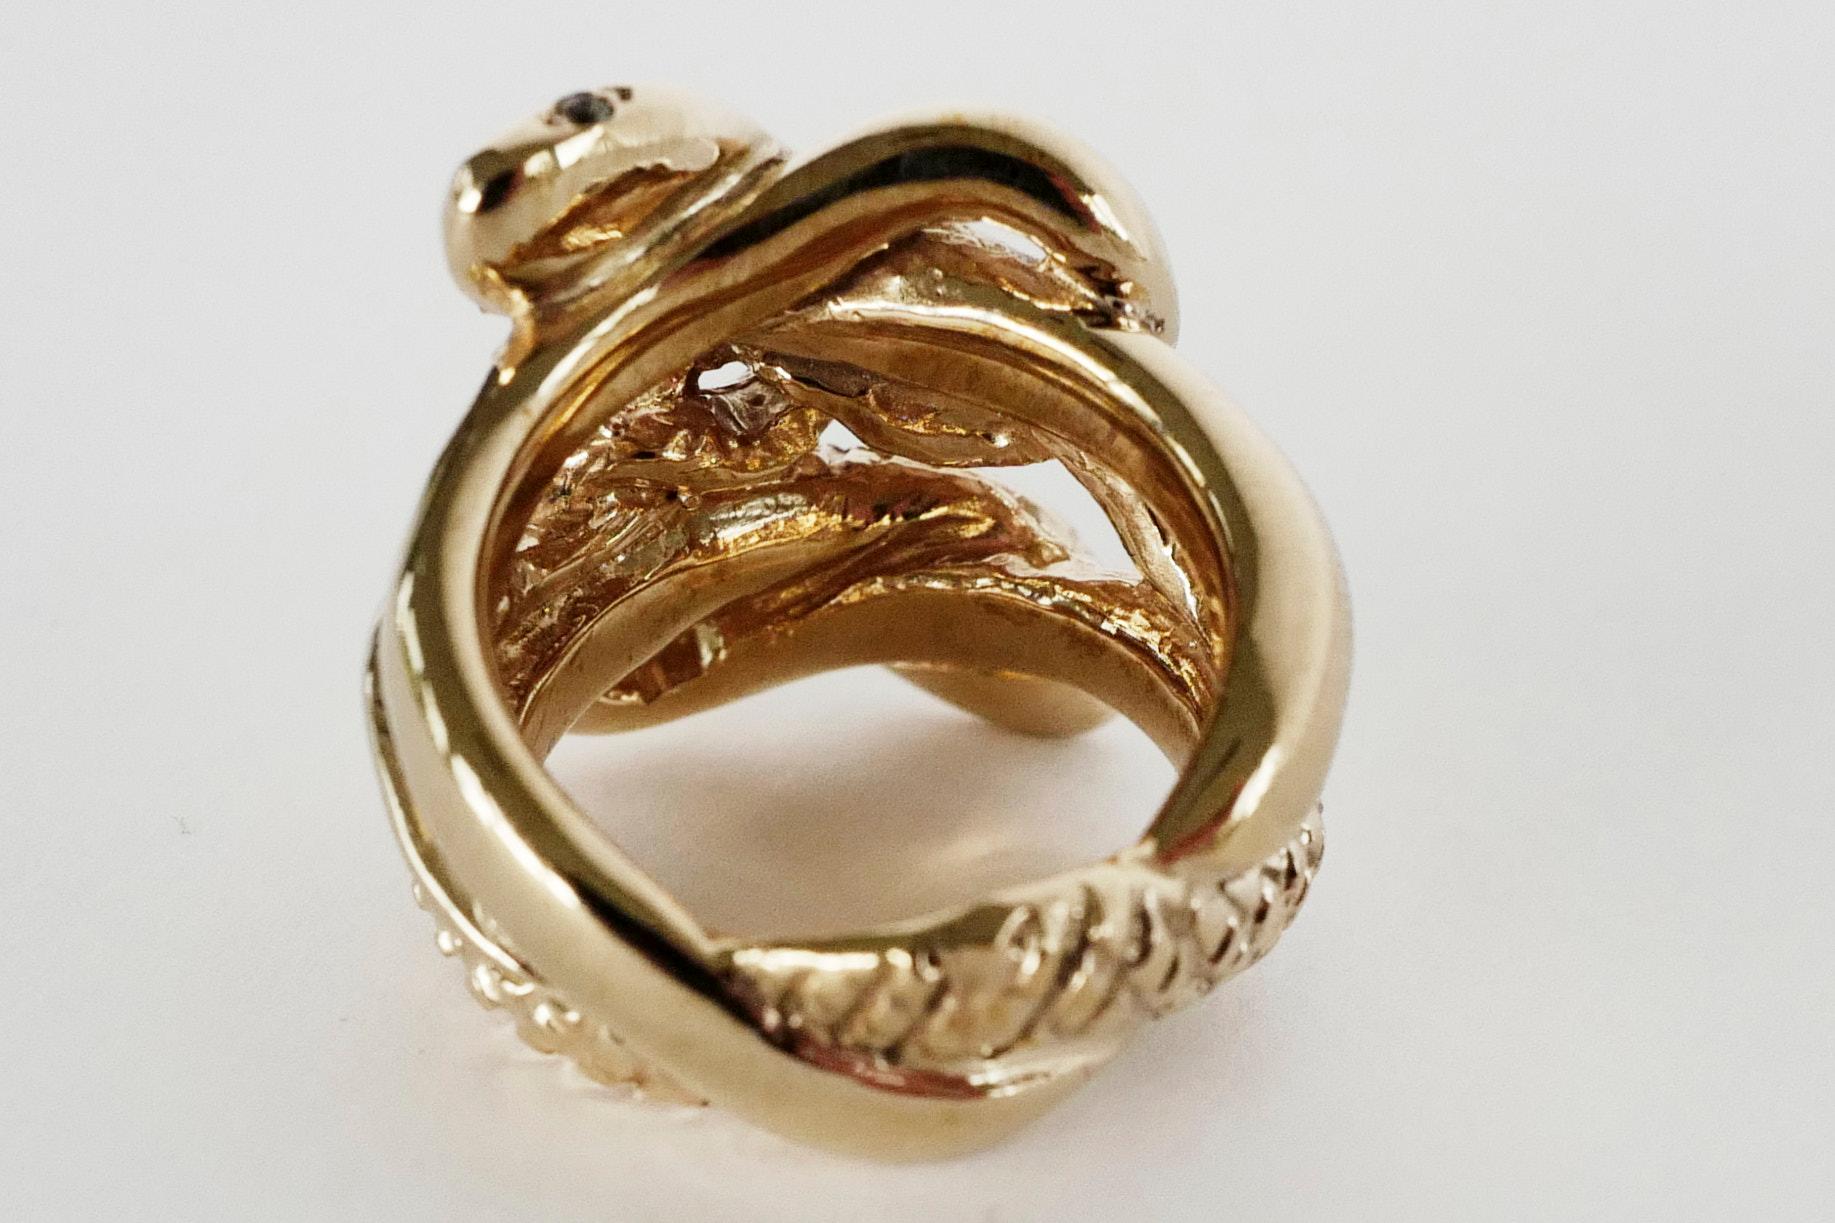 Snake Ring Gold Vermeil Emerald White Diamond Ruby Victorian Style J Dauphin For Sale 2